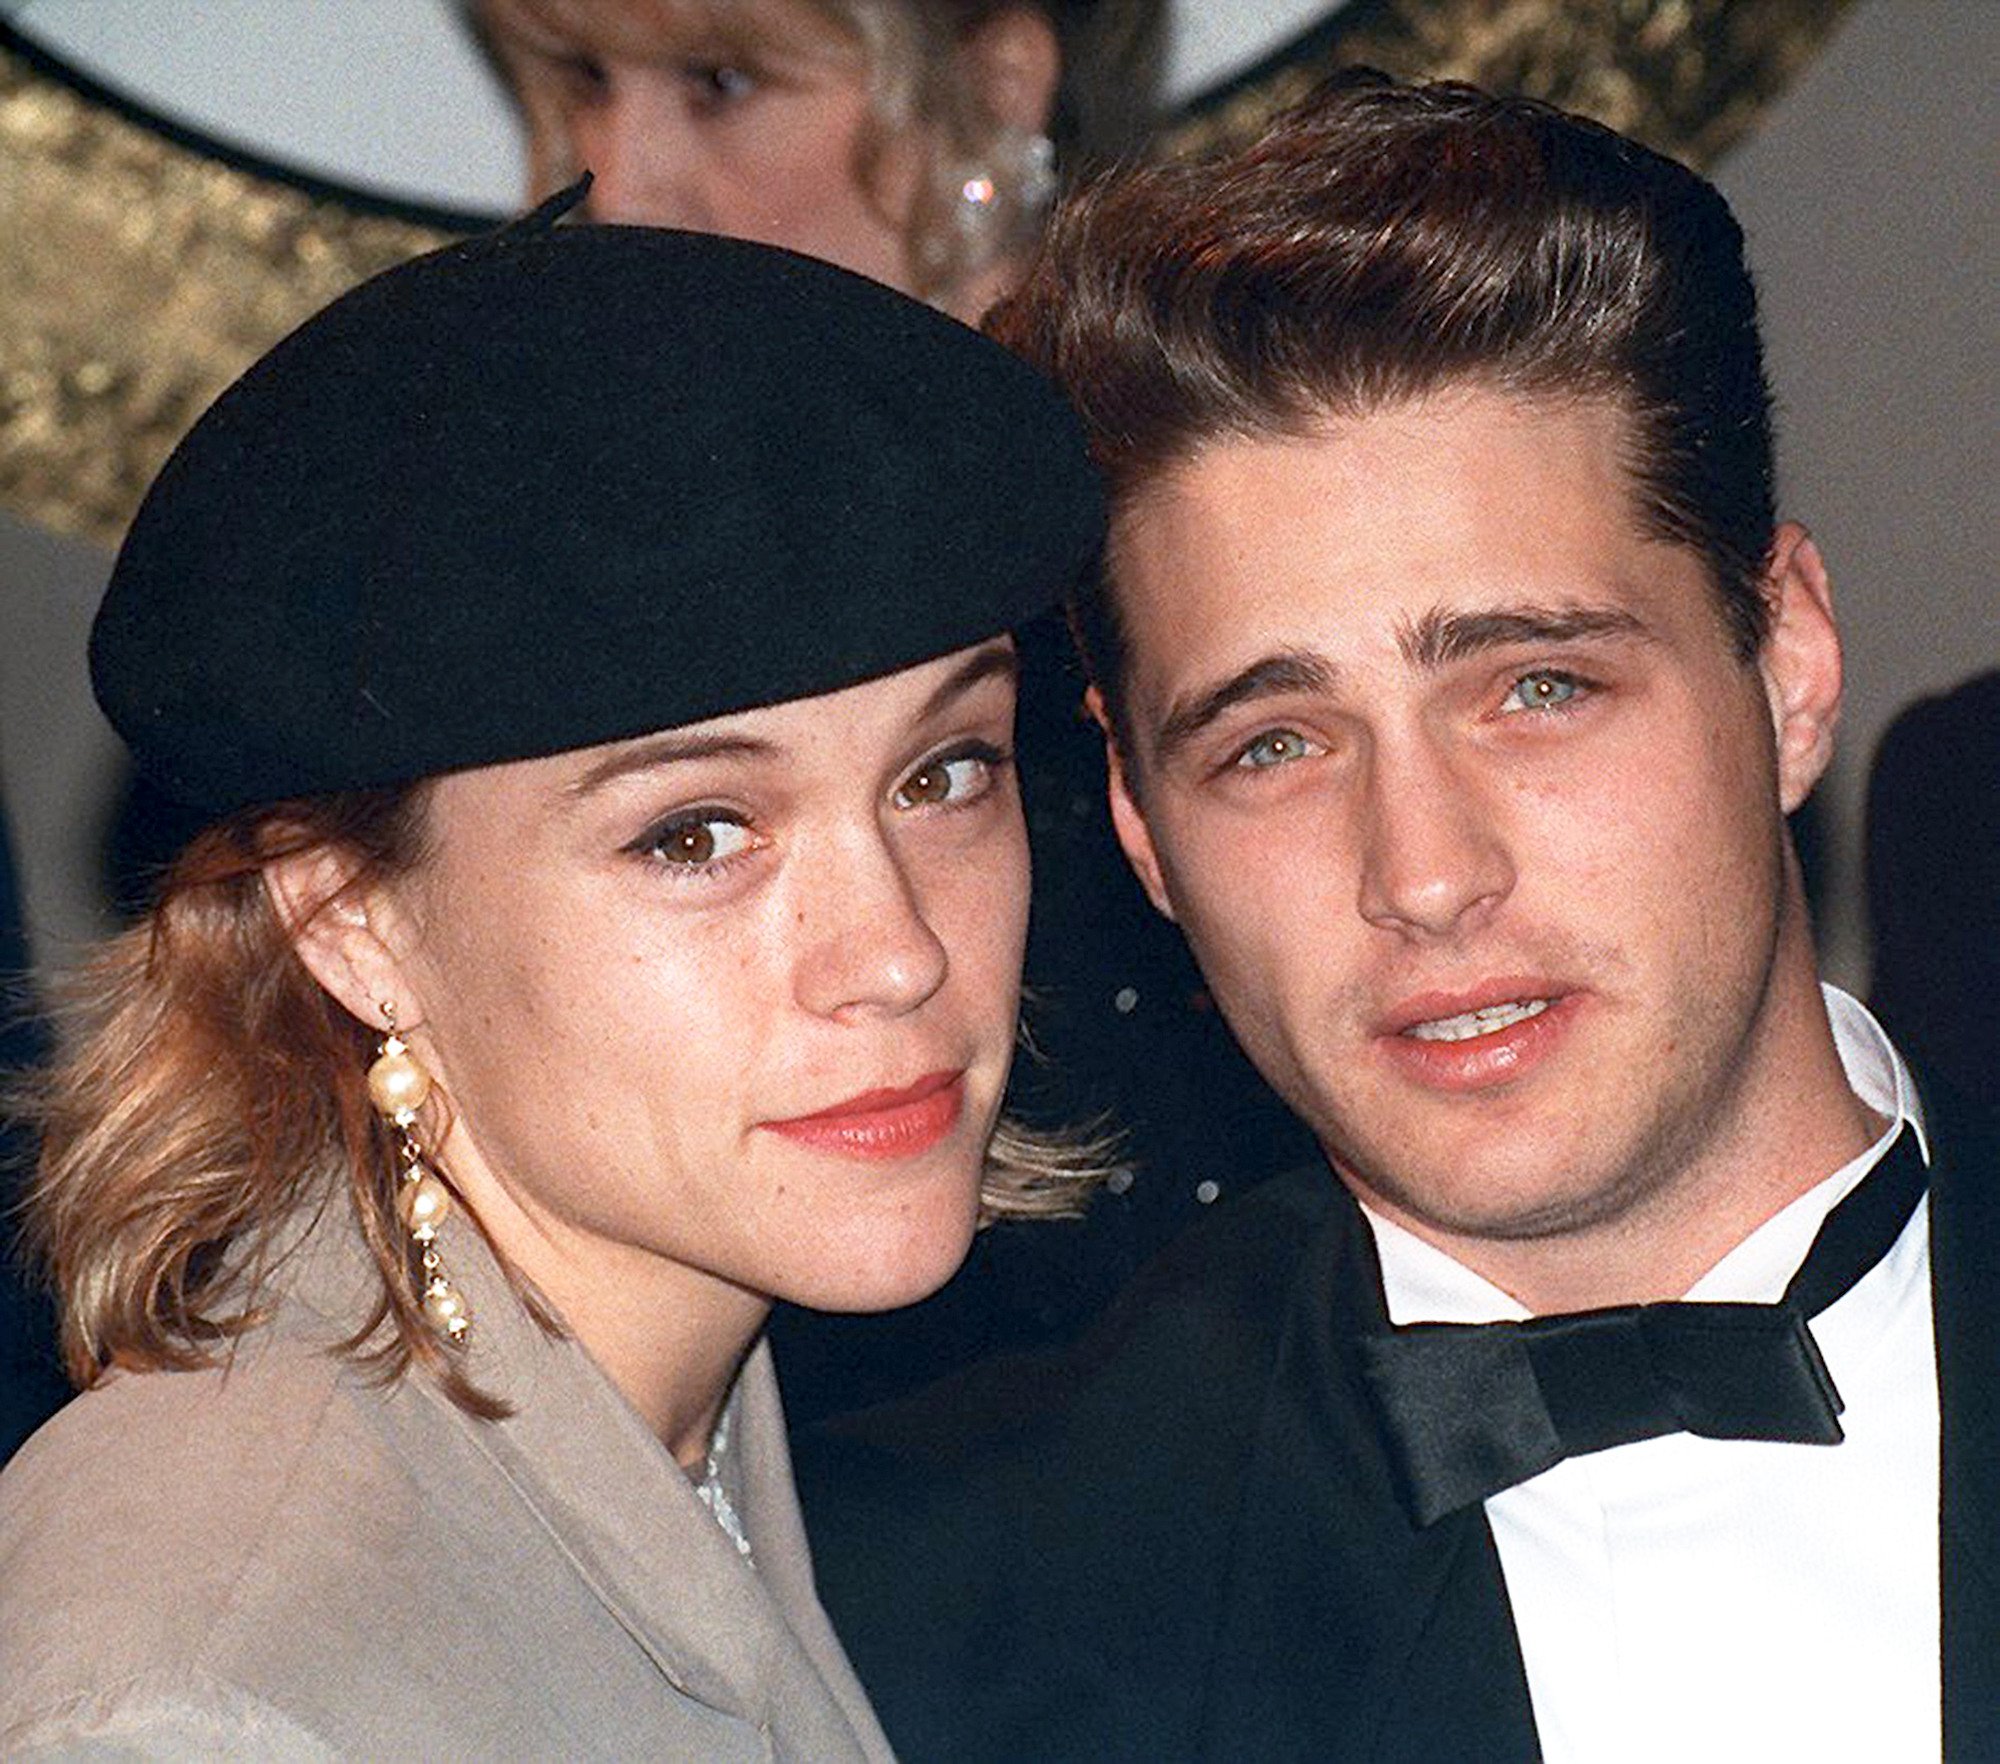 Emily Valentine actor Christine Elise poses with 'Beverly Hills, 90210' costar Jason Priestley